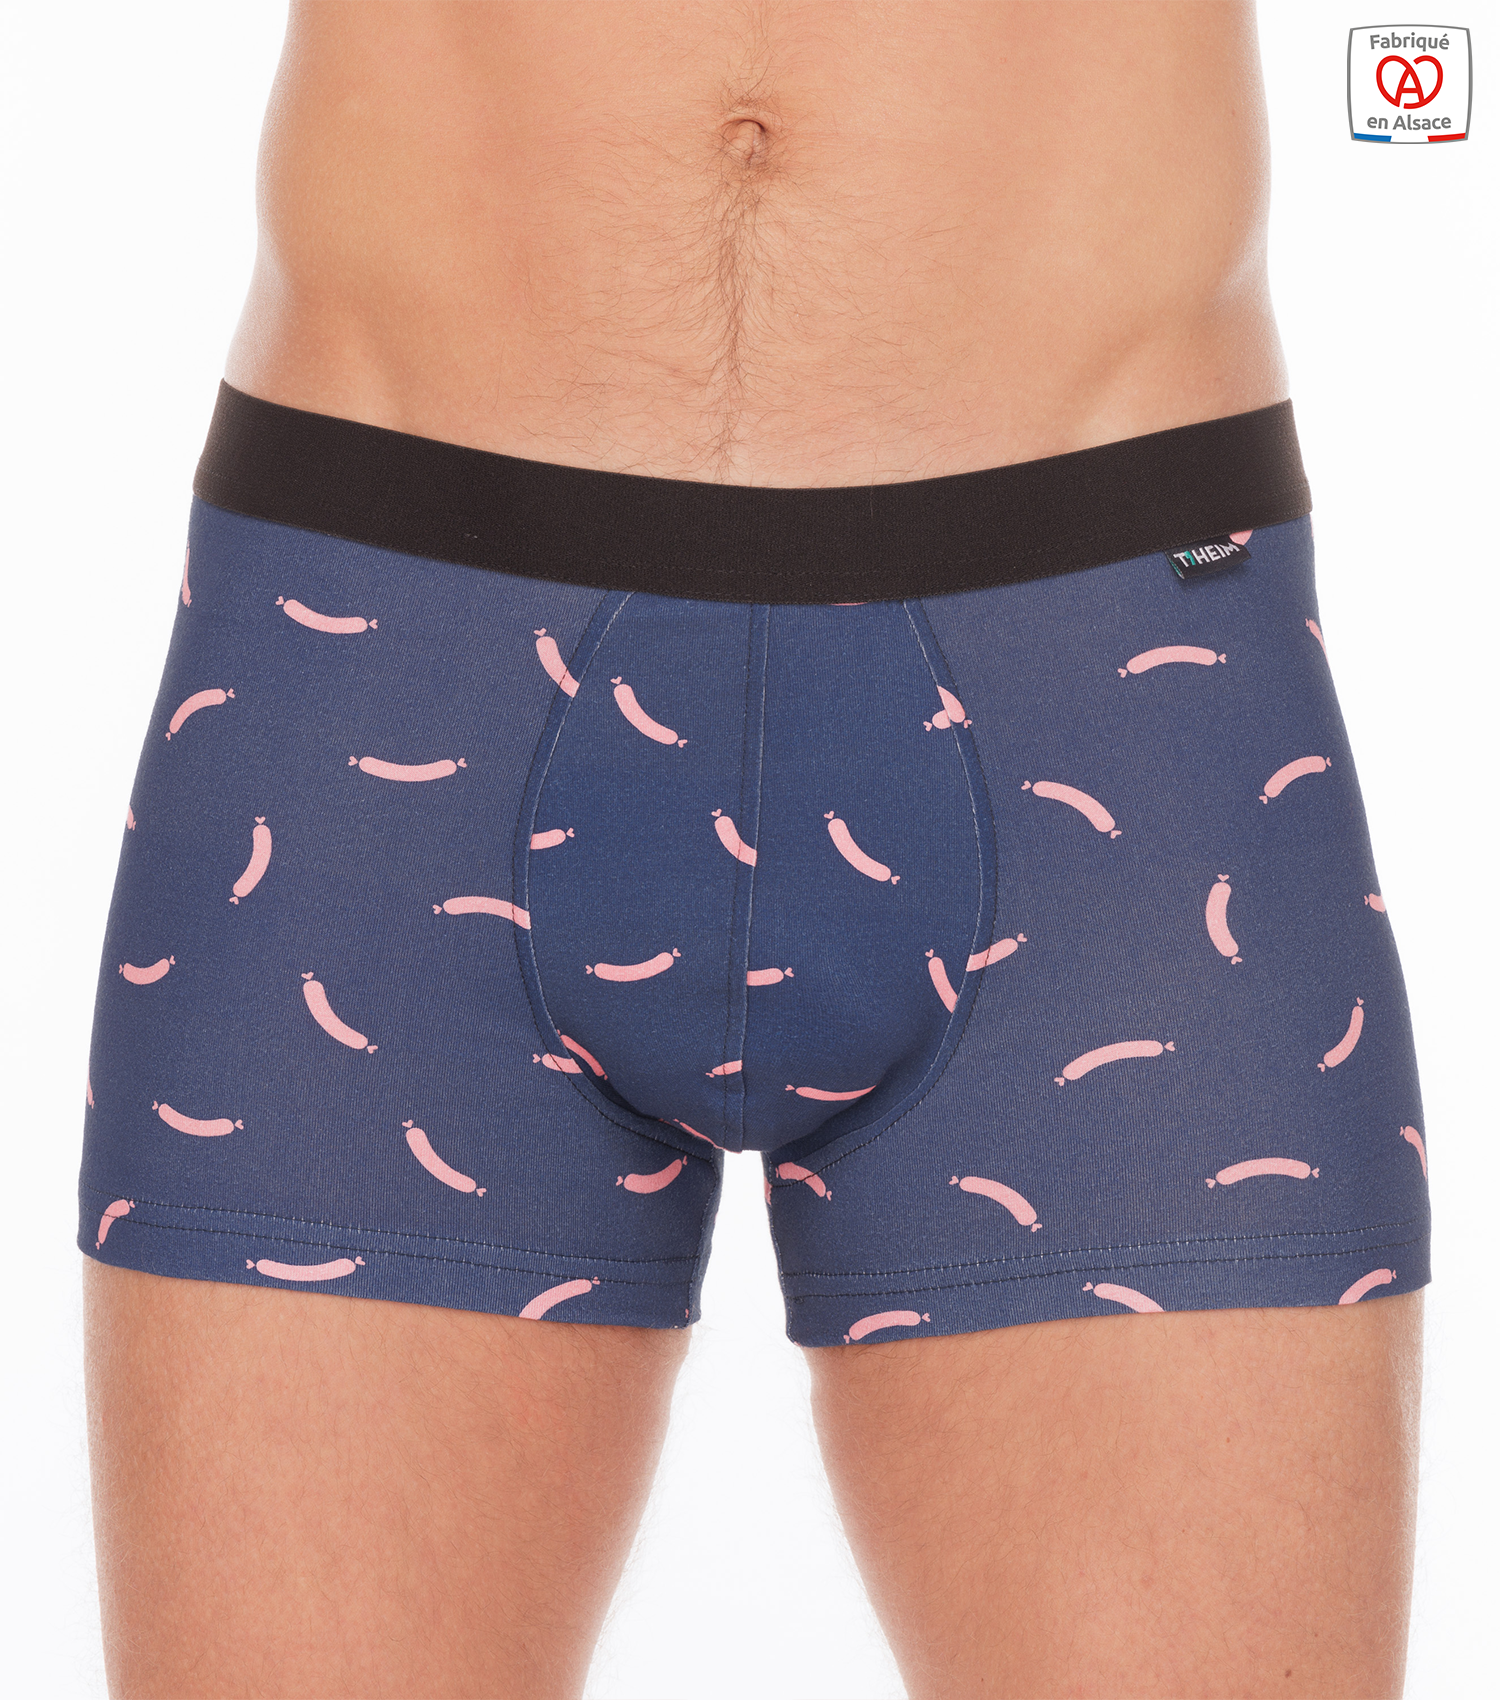 theim-boxer-coton-made-in-france-motifs-knack-1500-x-1700-px